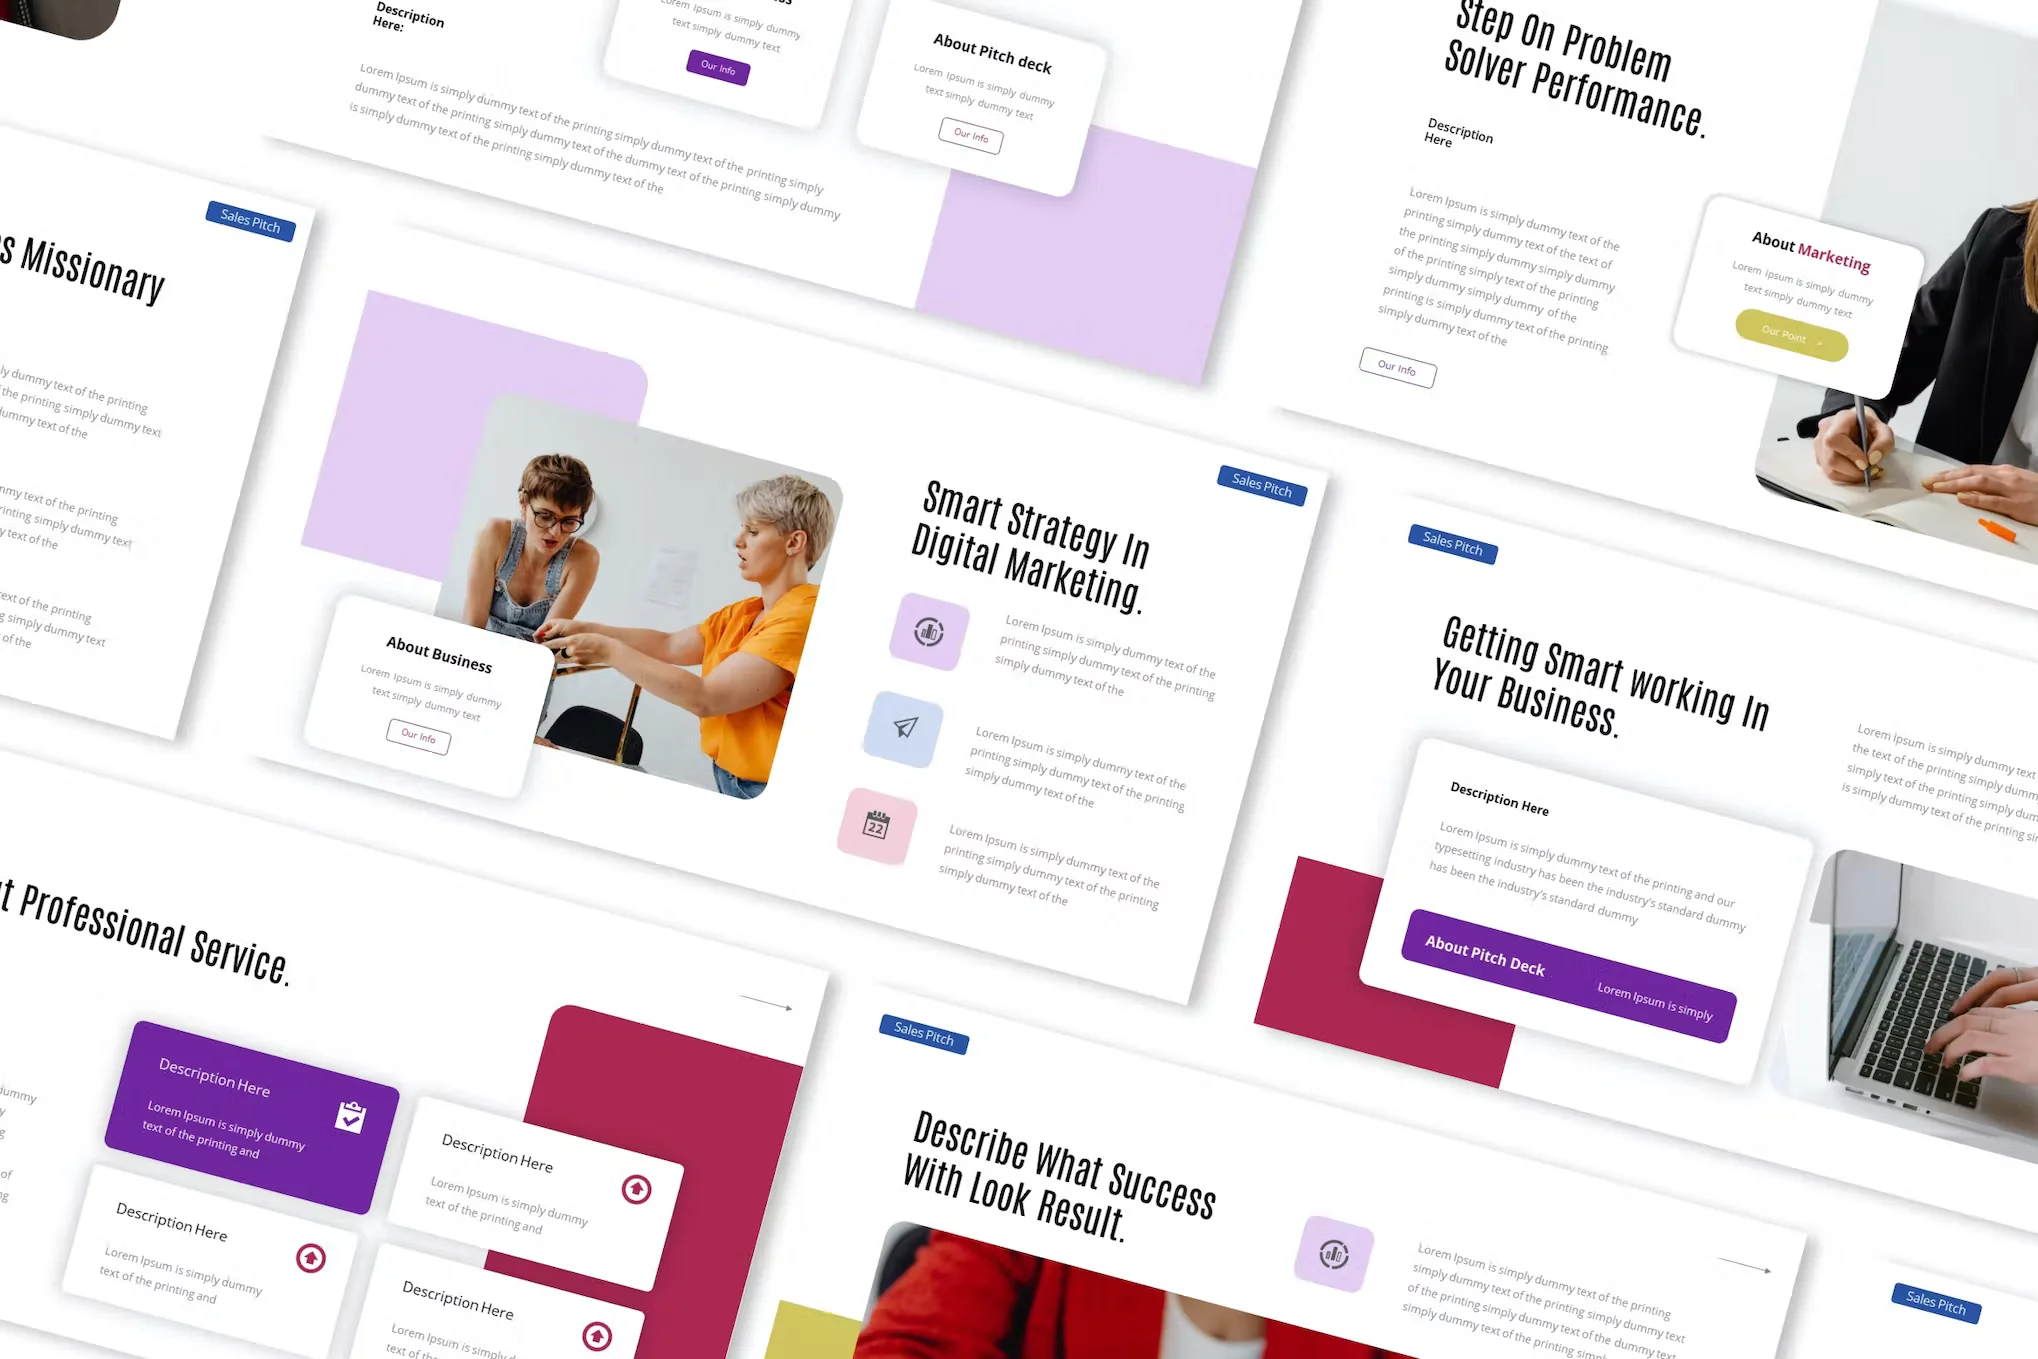 30 Best PowerPoint Templates For Your Marketing Strategy In 2023